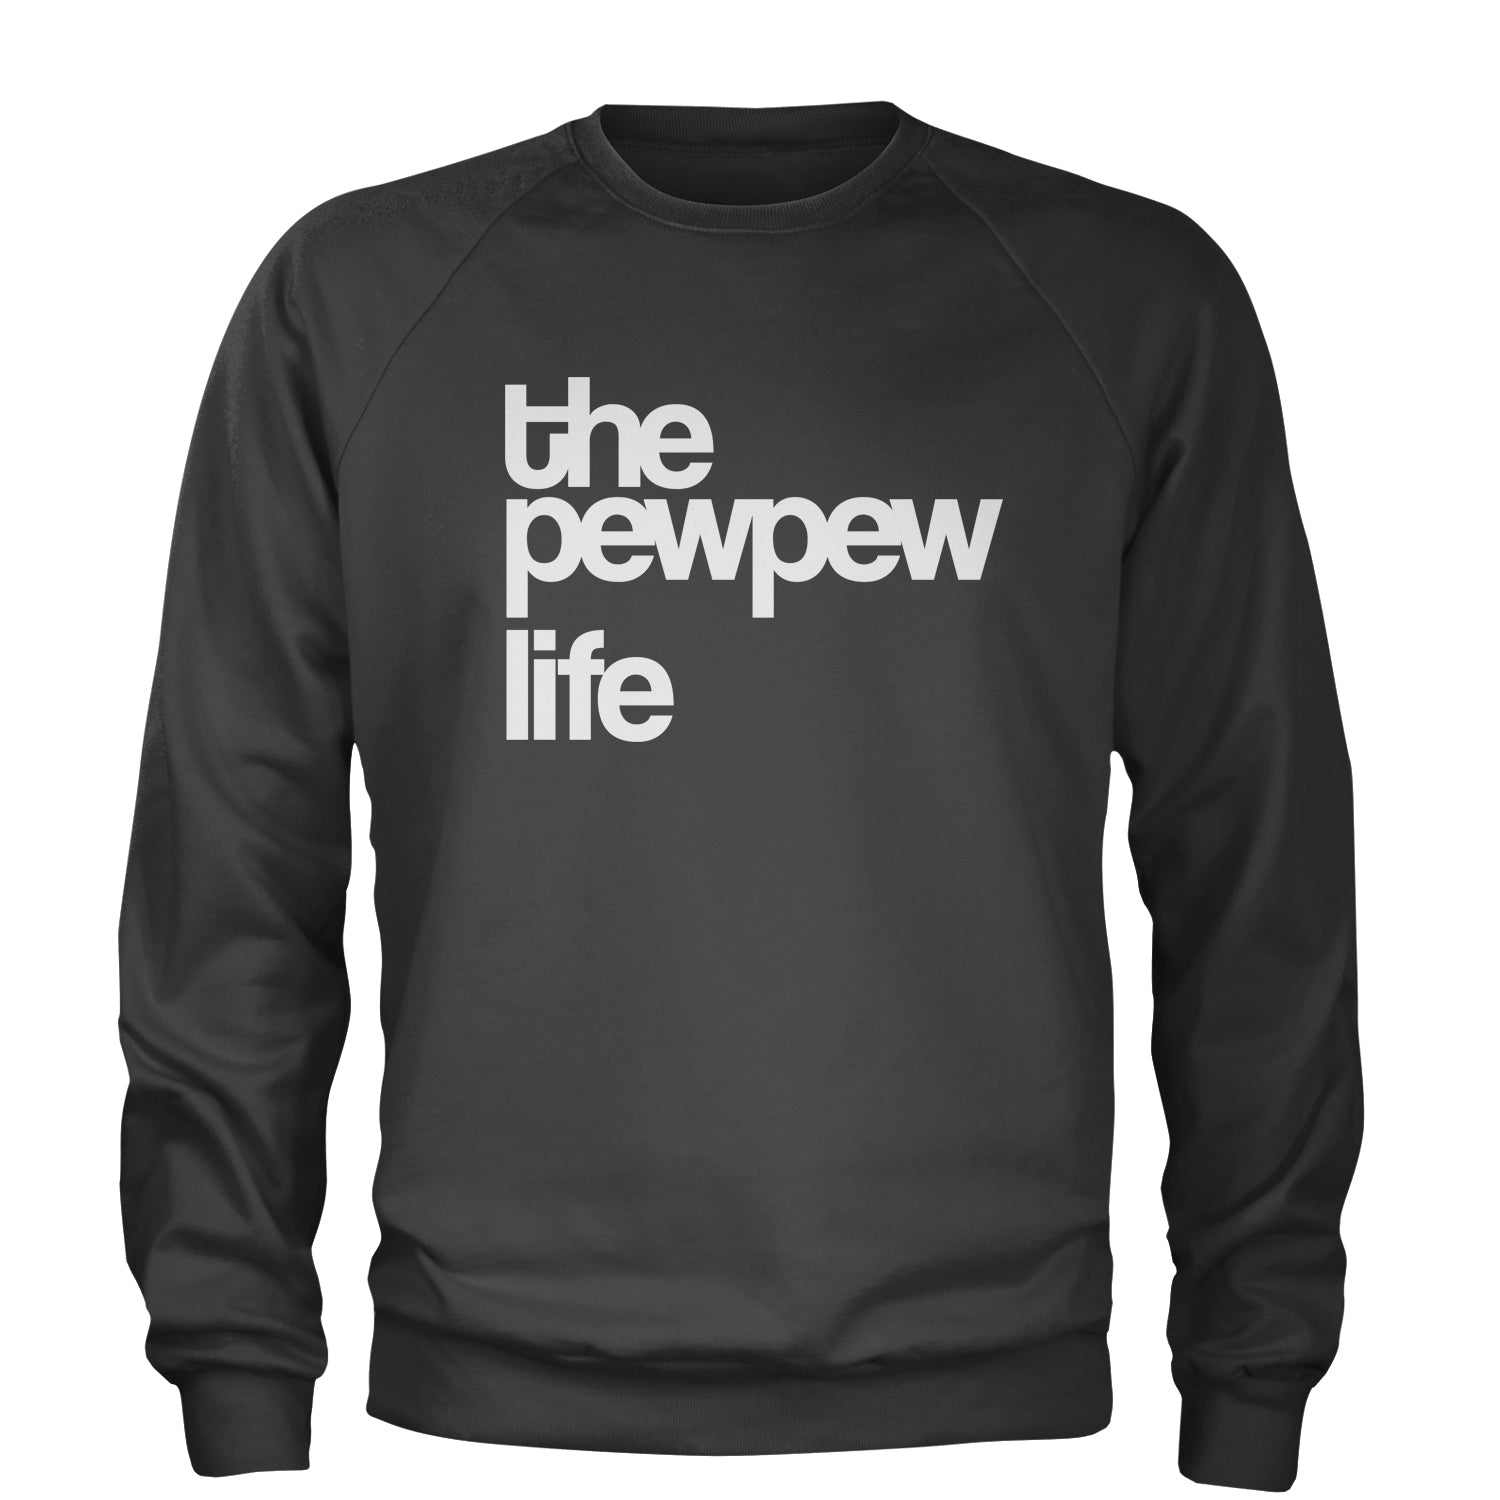 The PewPew Pew Pew Life Gun Rights Adult Crewneck Sweatshirt #expressiontees by Expression Tees